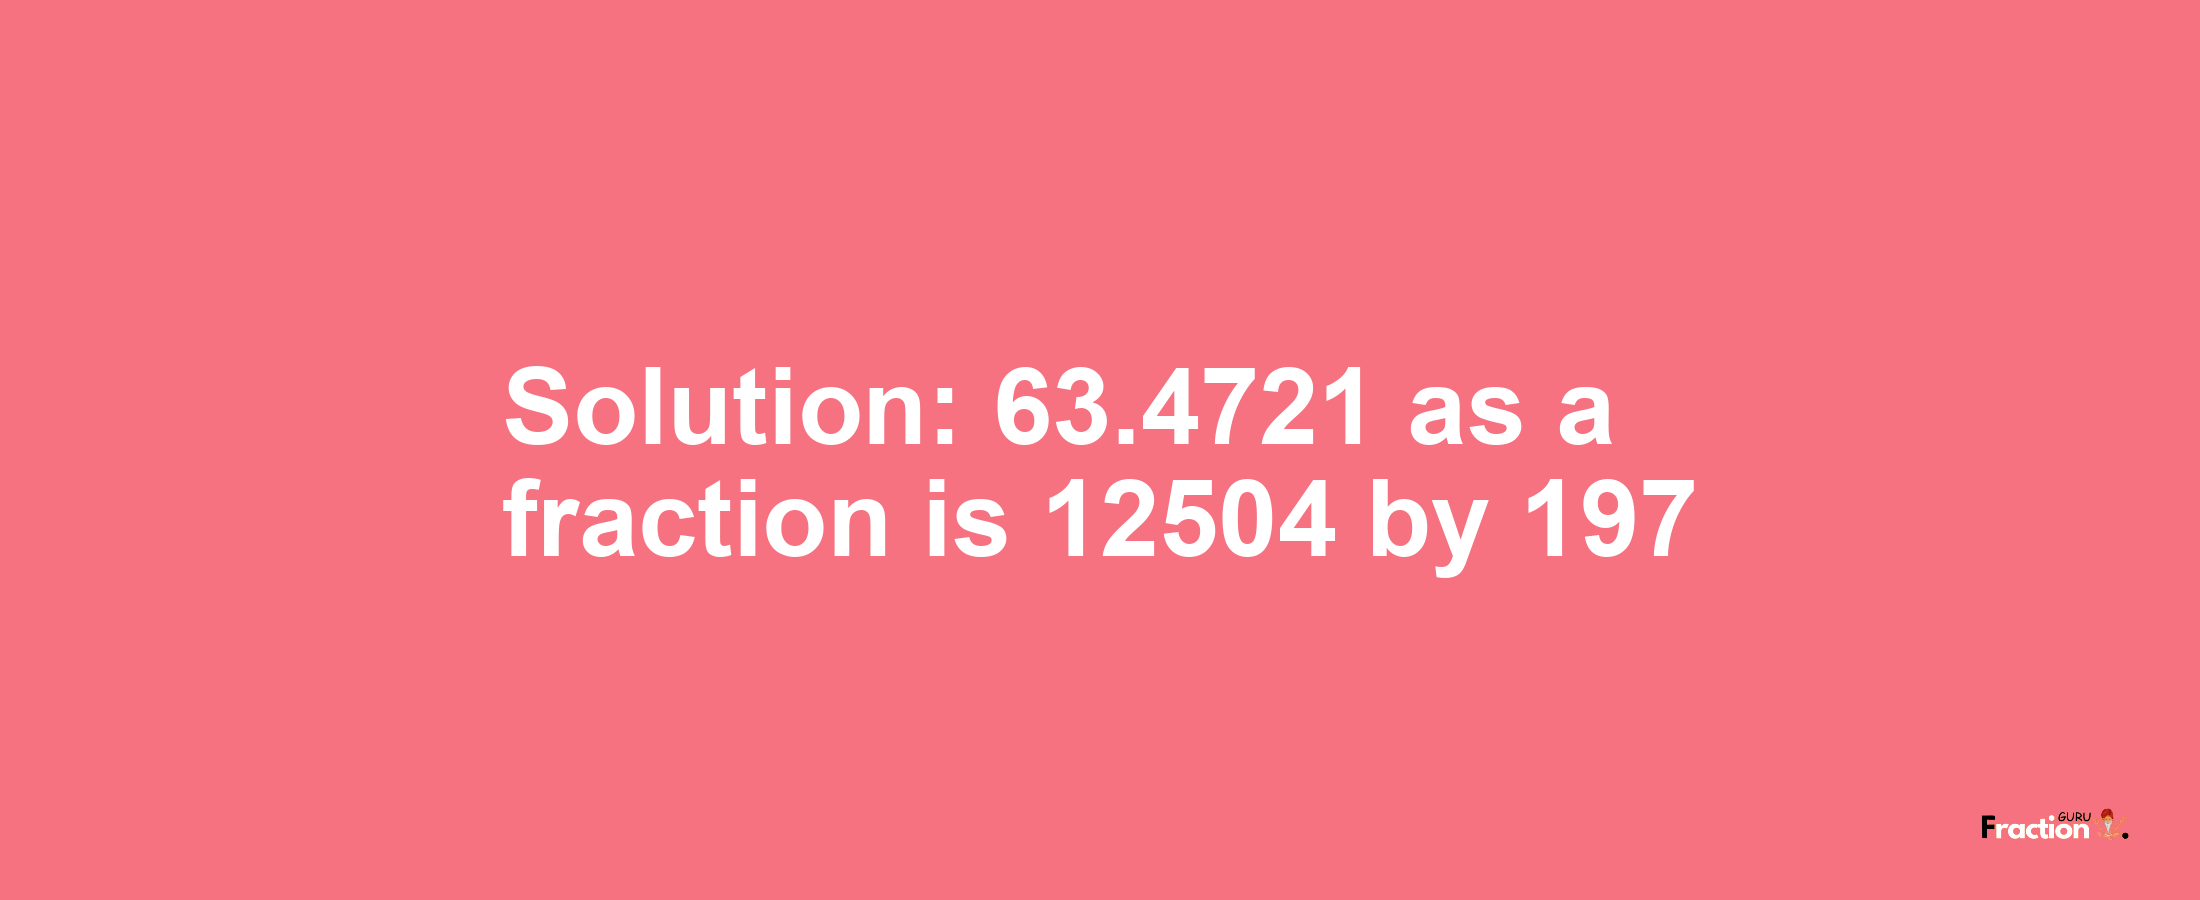 Solution:63.4721 as a fraction is 12504/197